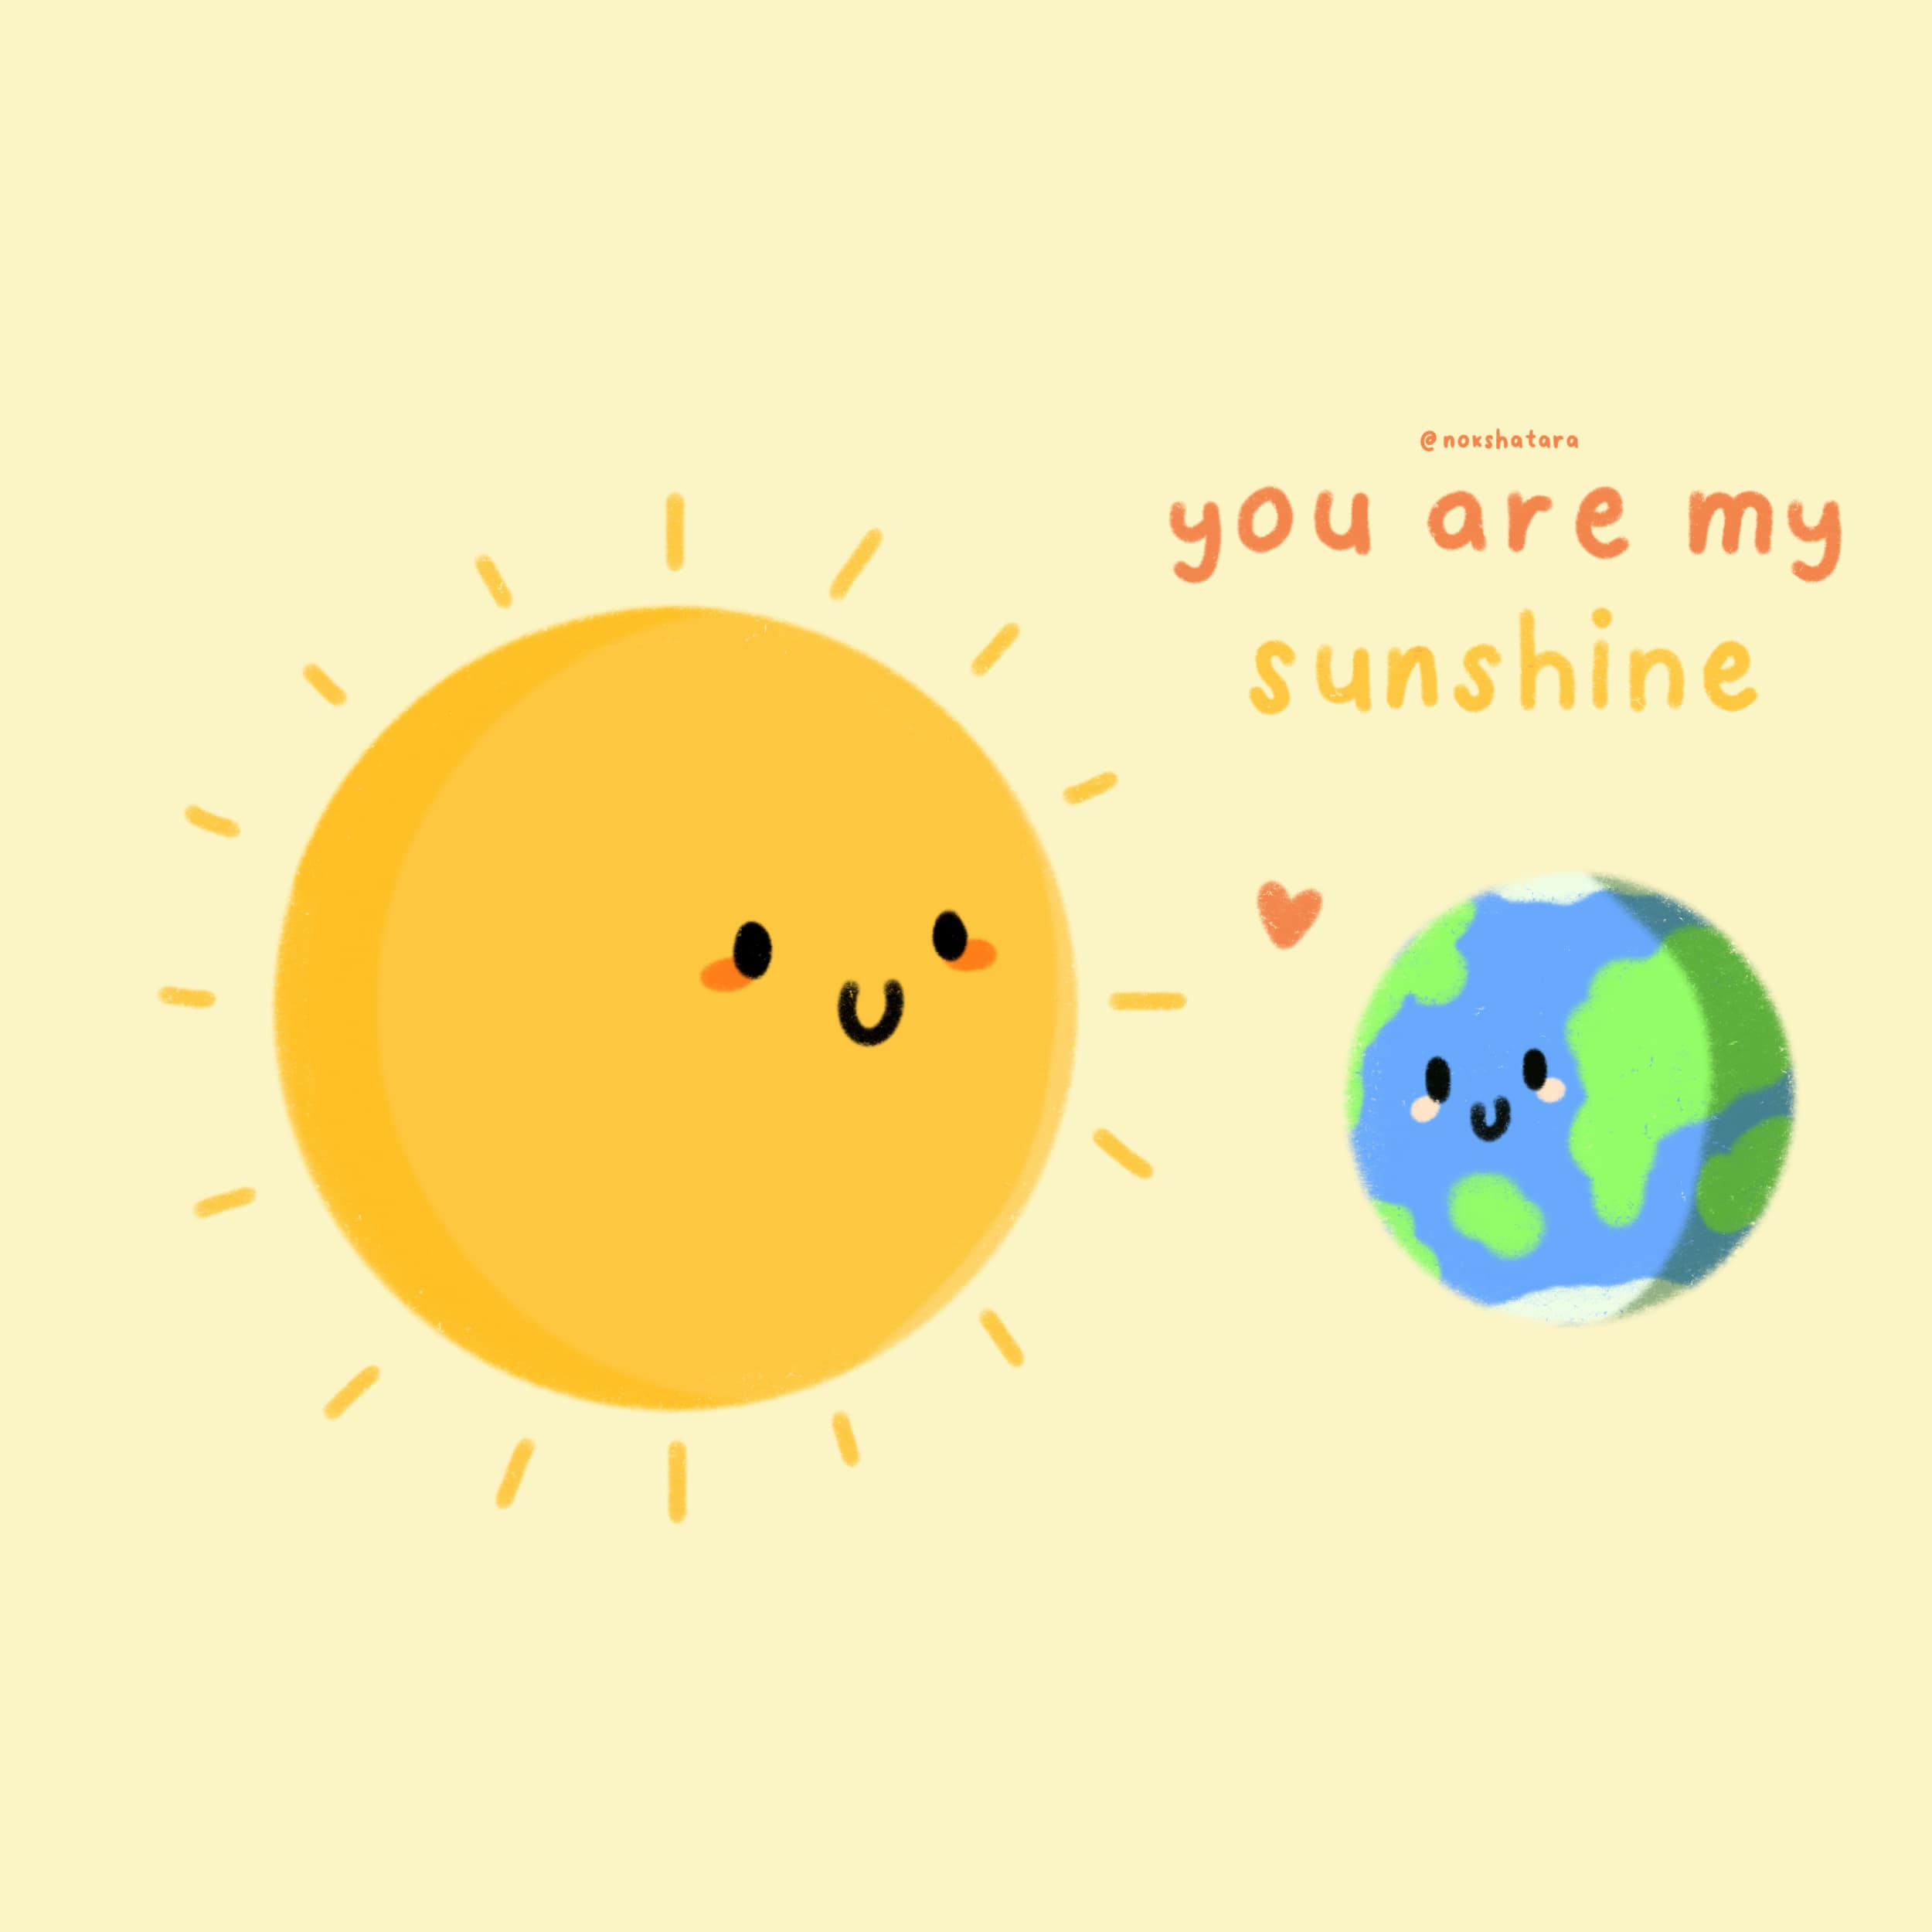 Illustration of sun and earth saying you are my sunshine